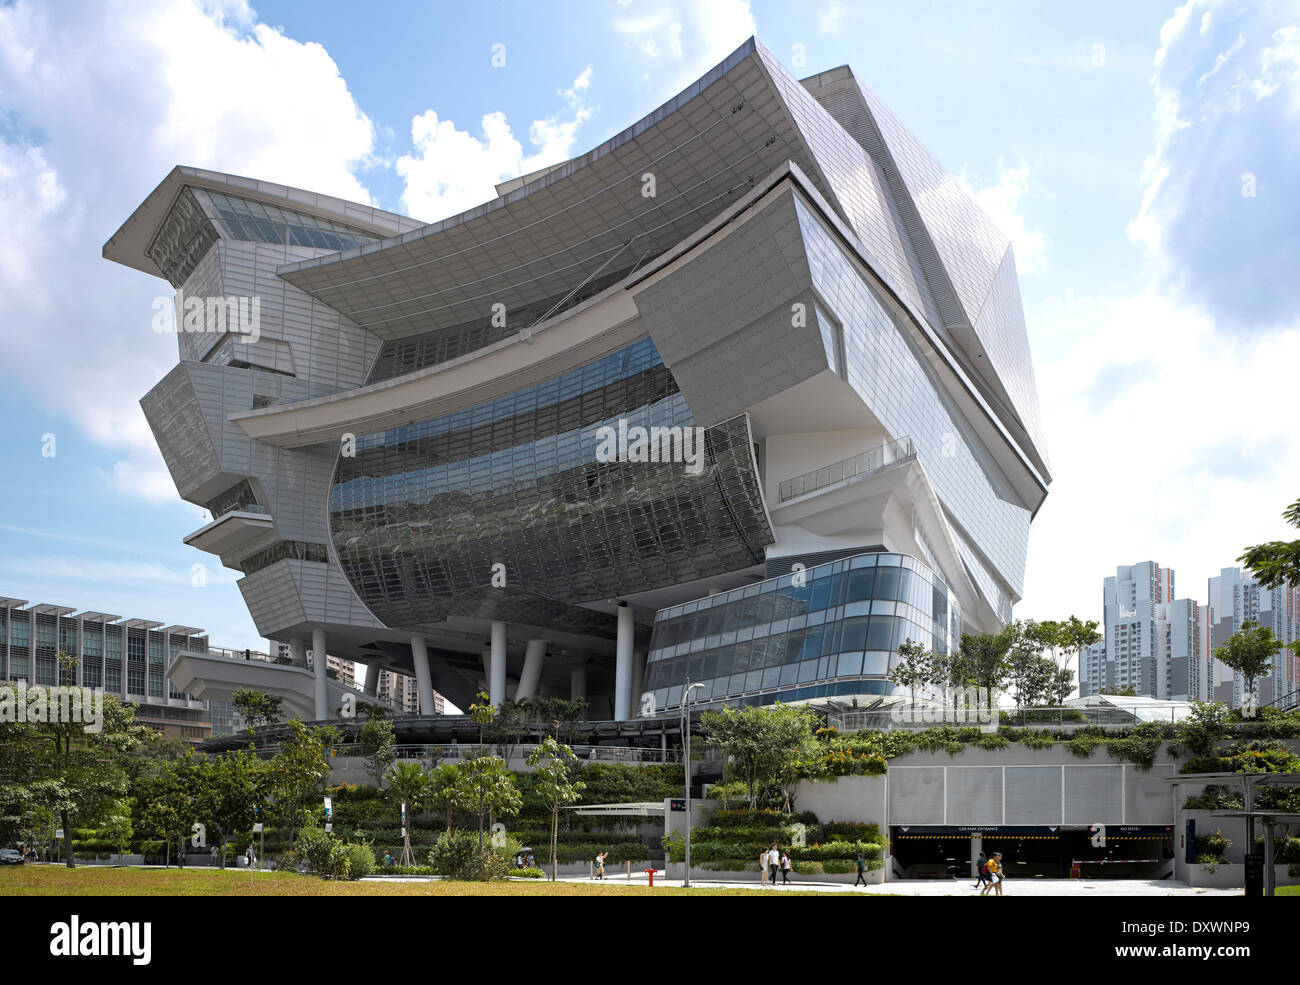 The Star Performing Arts Centre, Singapore, Singapore. Architect: Aedas Architects Ltd, 2013. Overall exterior view. Stock Photo